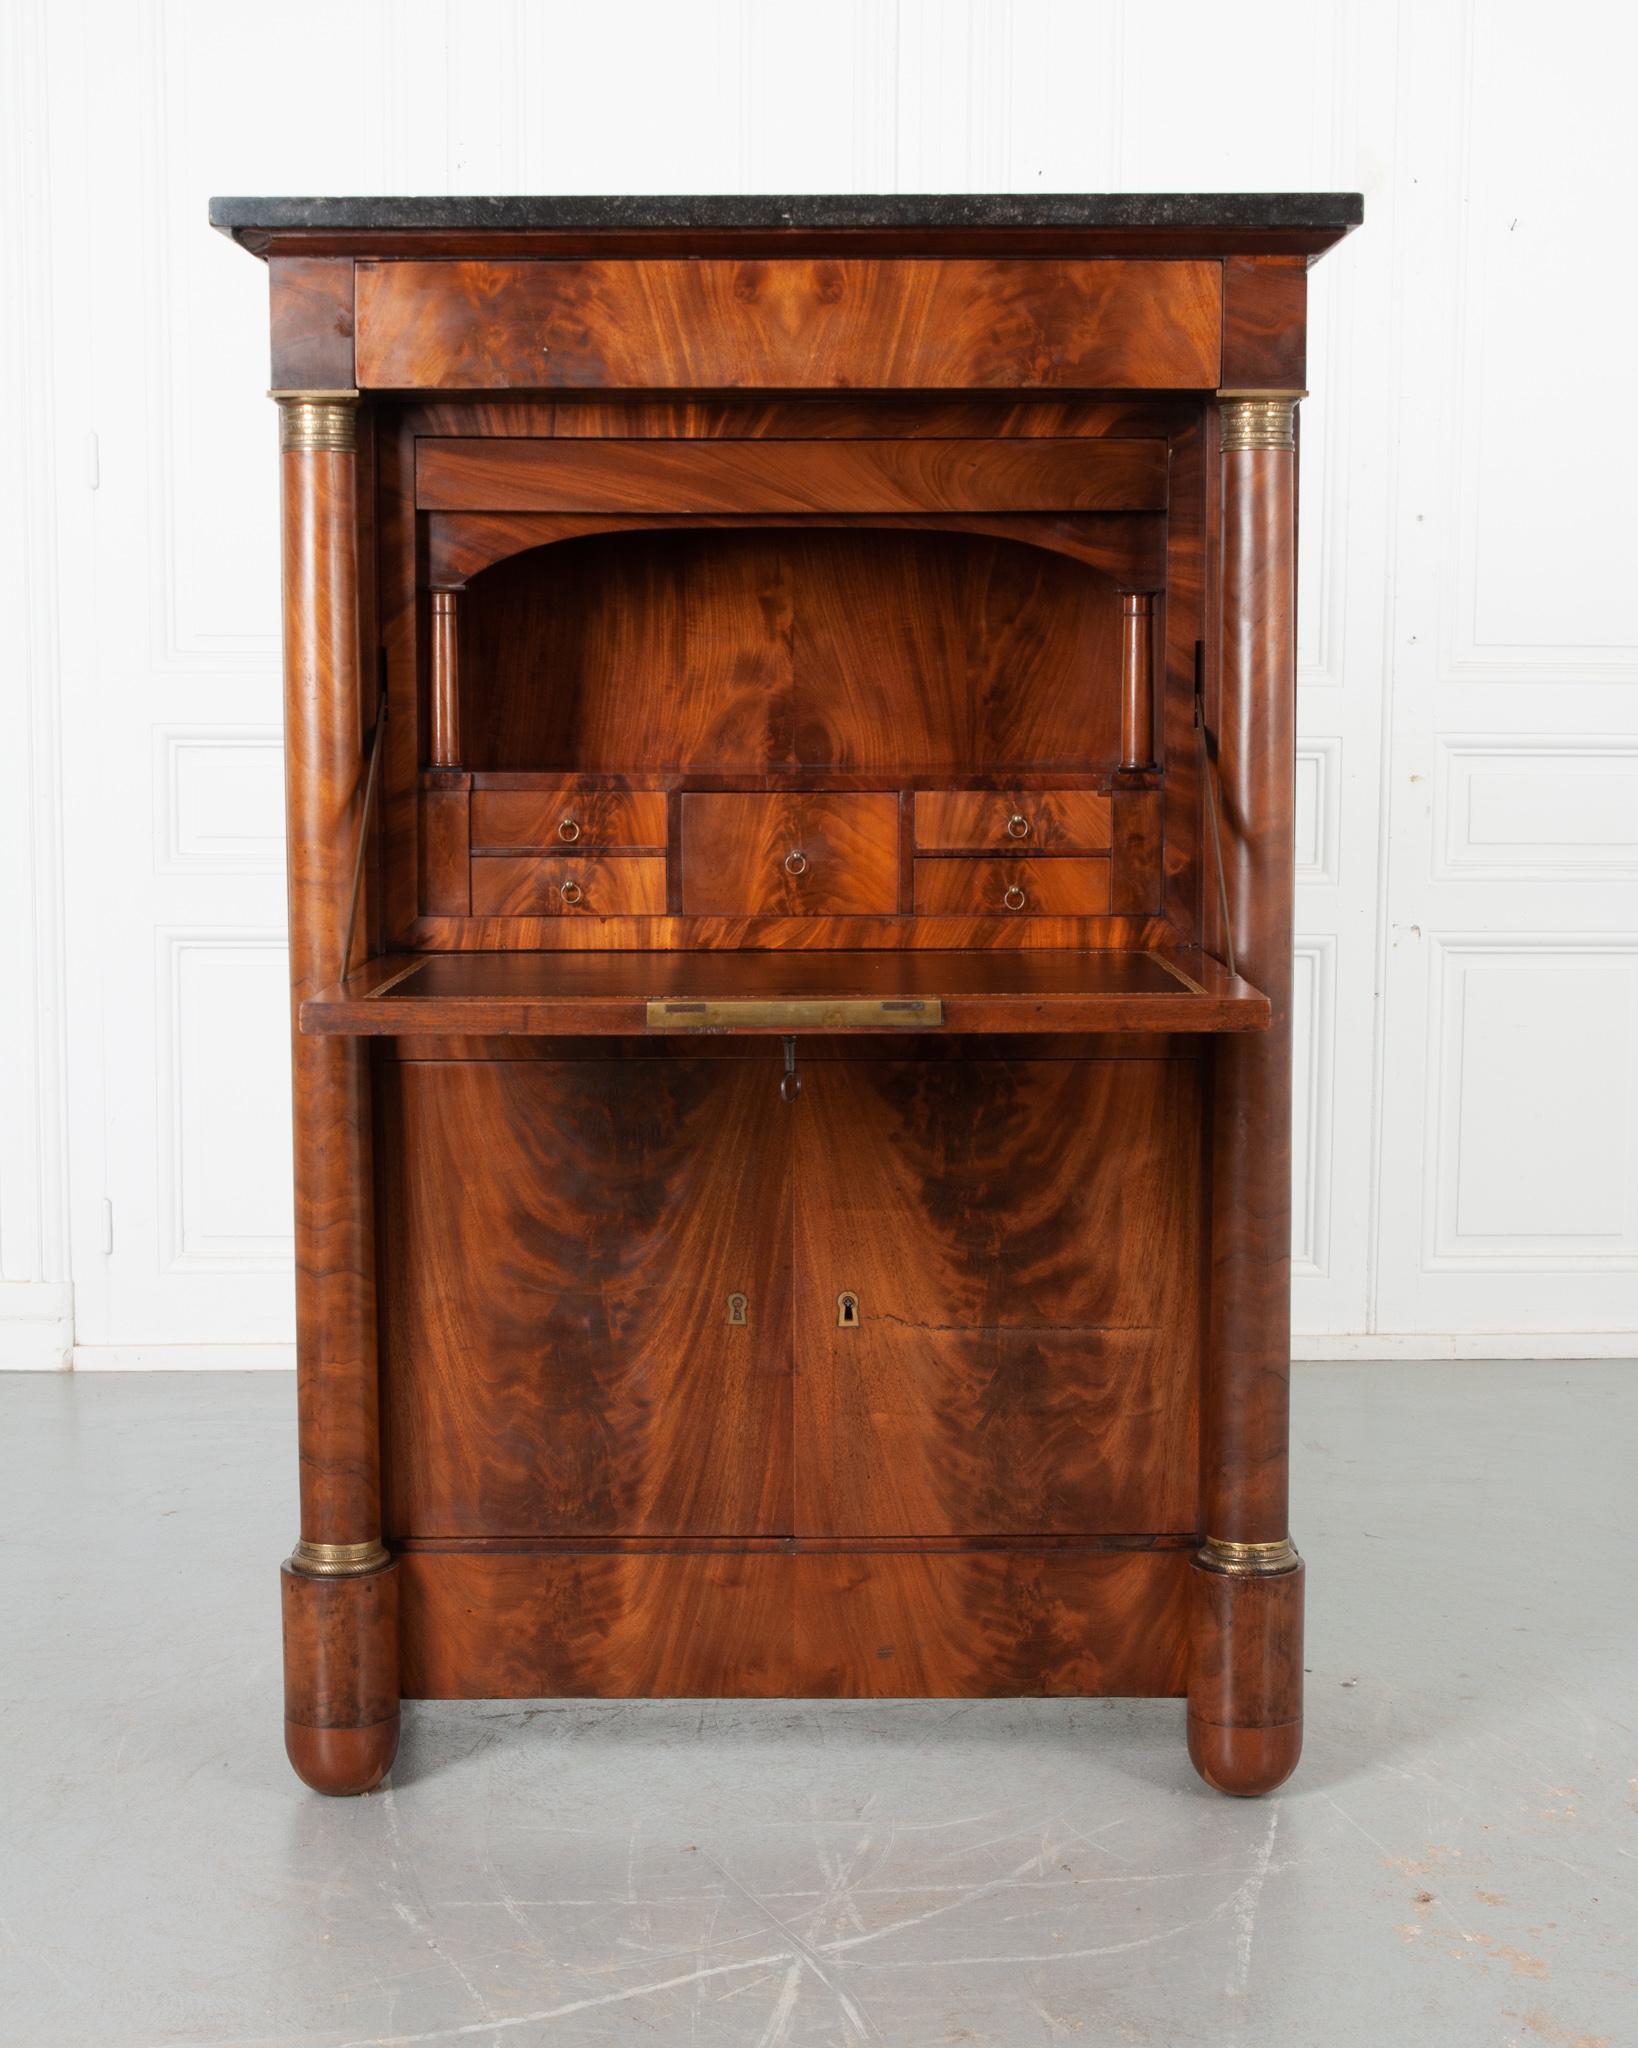 A dignified 19th century mahogany secre´taire a` abattant from France . This desk has an exceptional black, Belgian Granite top with fossil inclusions resting above a single drawer disguised into the apron. Just below the top drawer, the front of